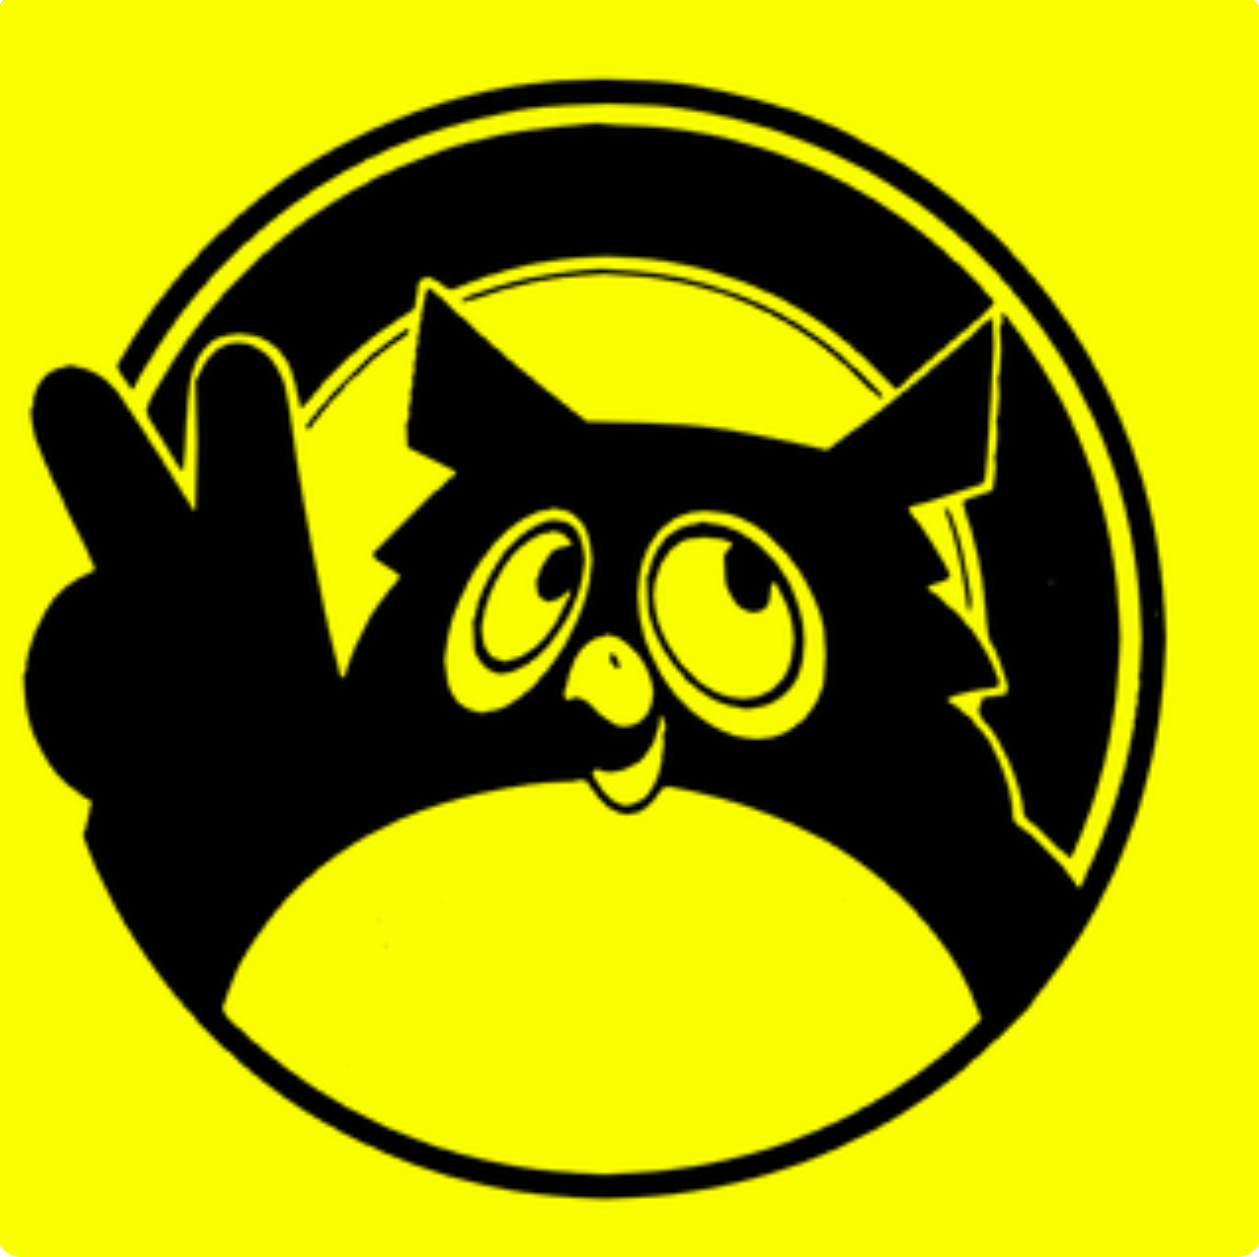 A picture of New J Channel's logo, an anthropomorphic owl raising a thumbs up, taken from the obi strips of Discomate label records